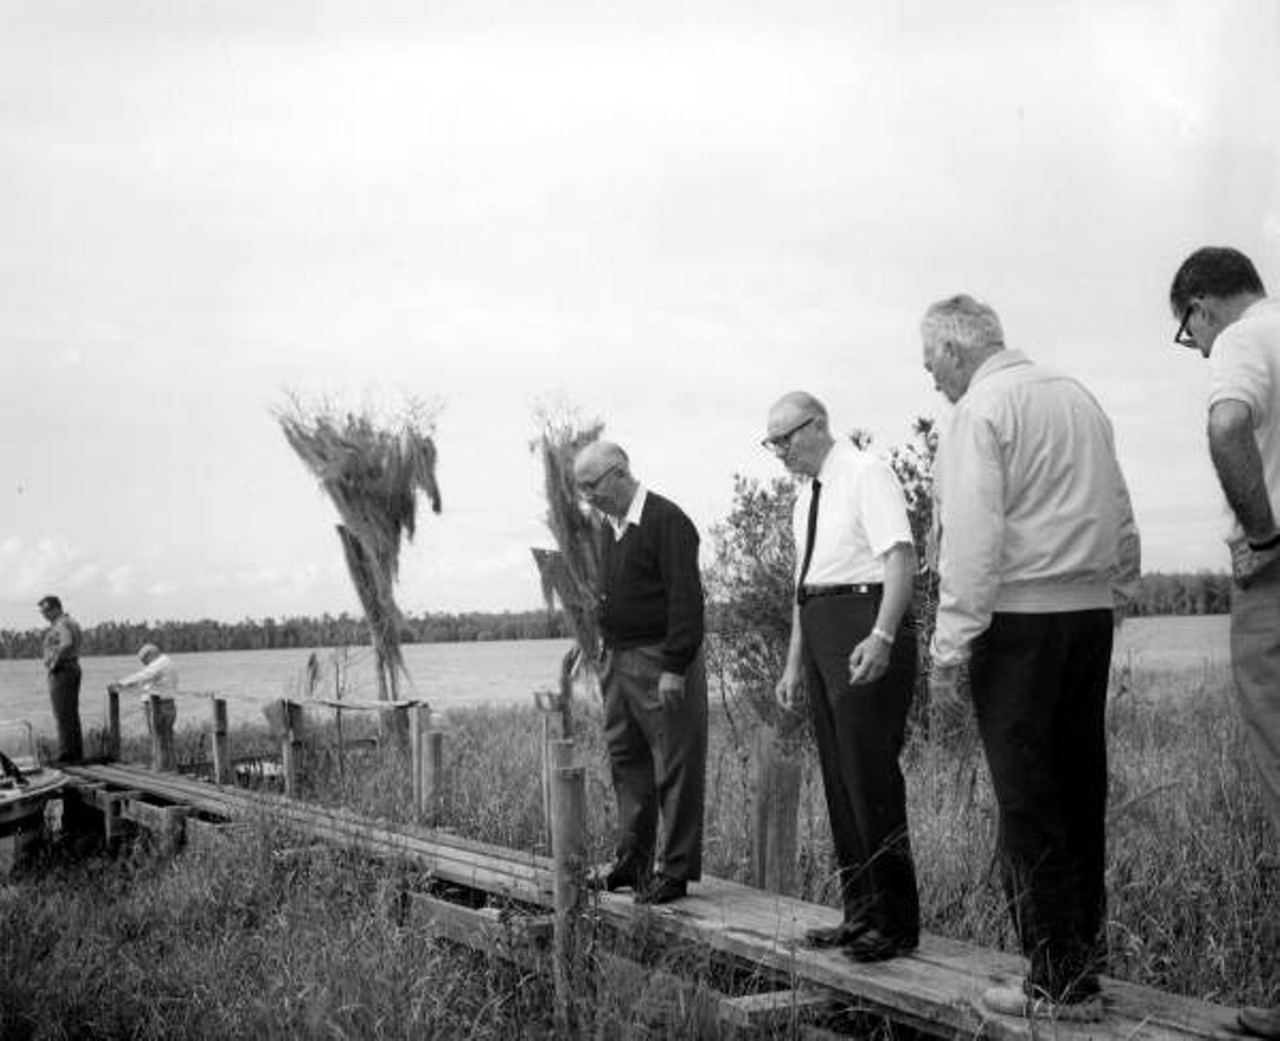 Roy Disney and company inspecting property for Disney World (Between 1963 and 1965).